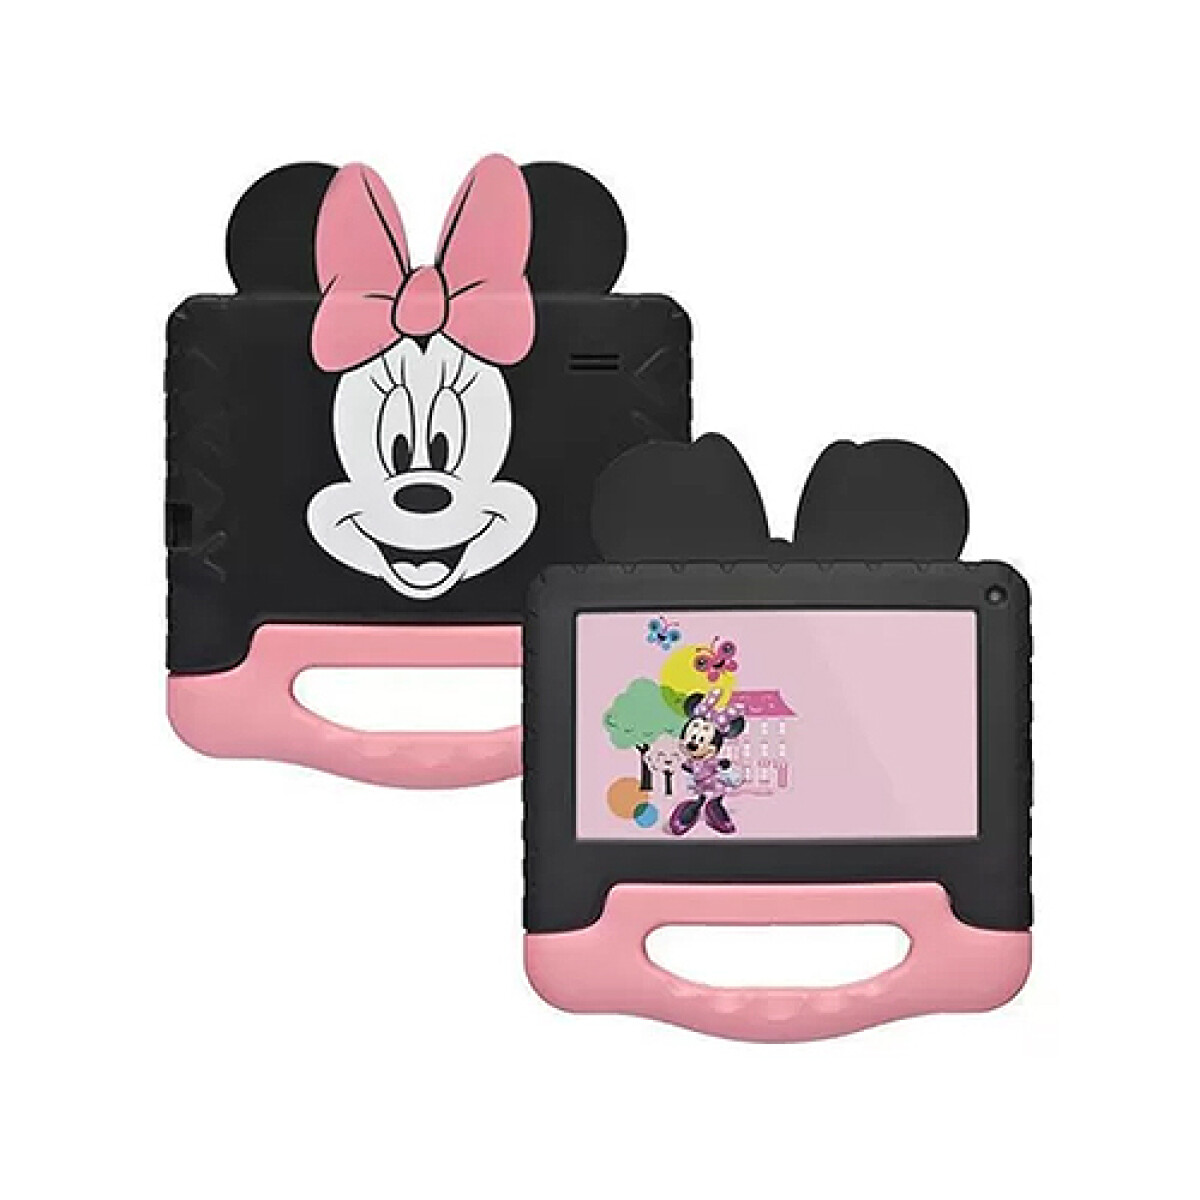 TABLET MULTILASER- NB 605- Minnie Pant. 7” 2GB 32GB And. 11 - Sin color 